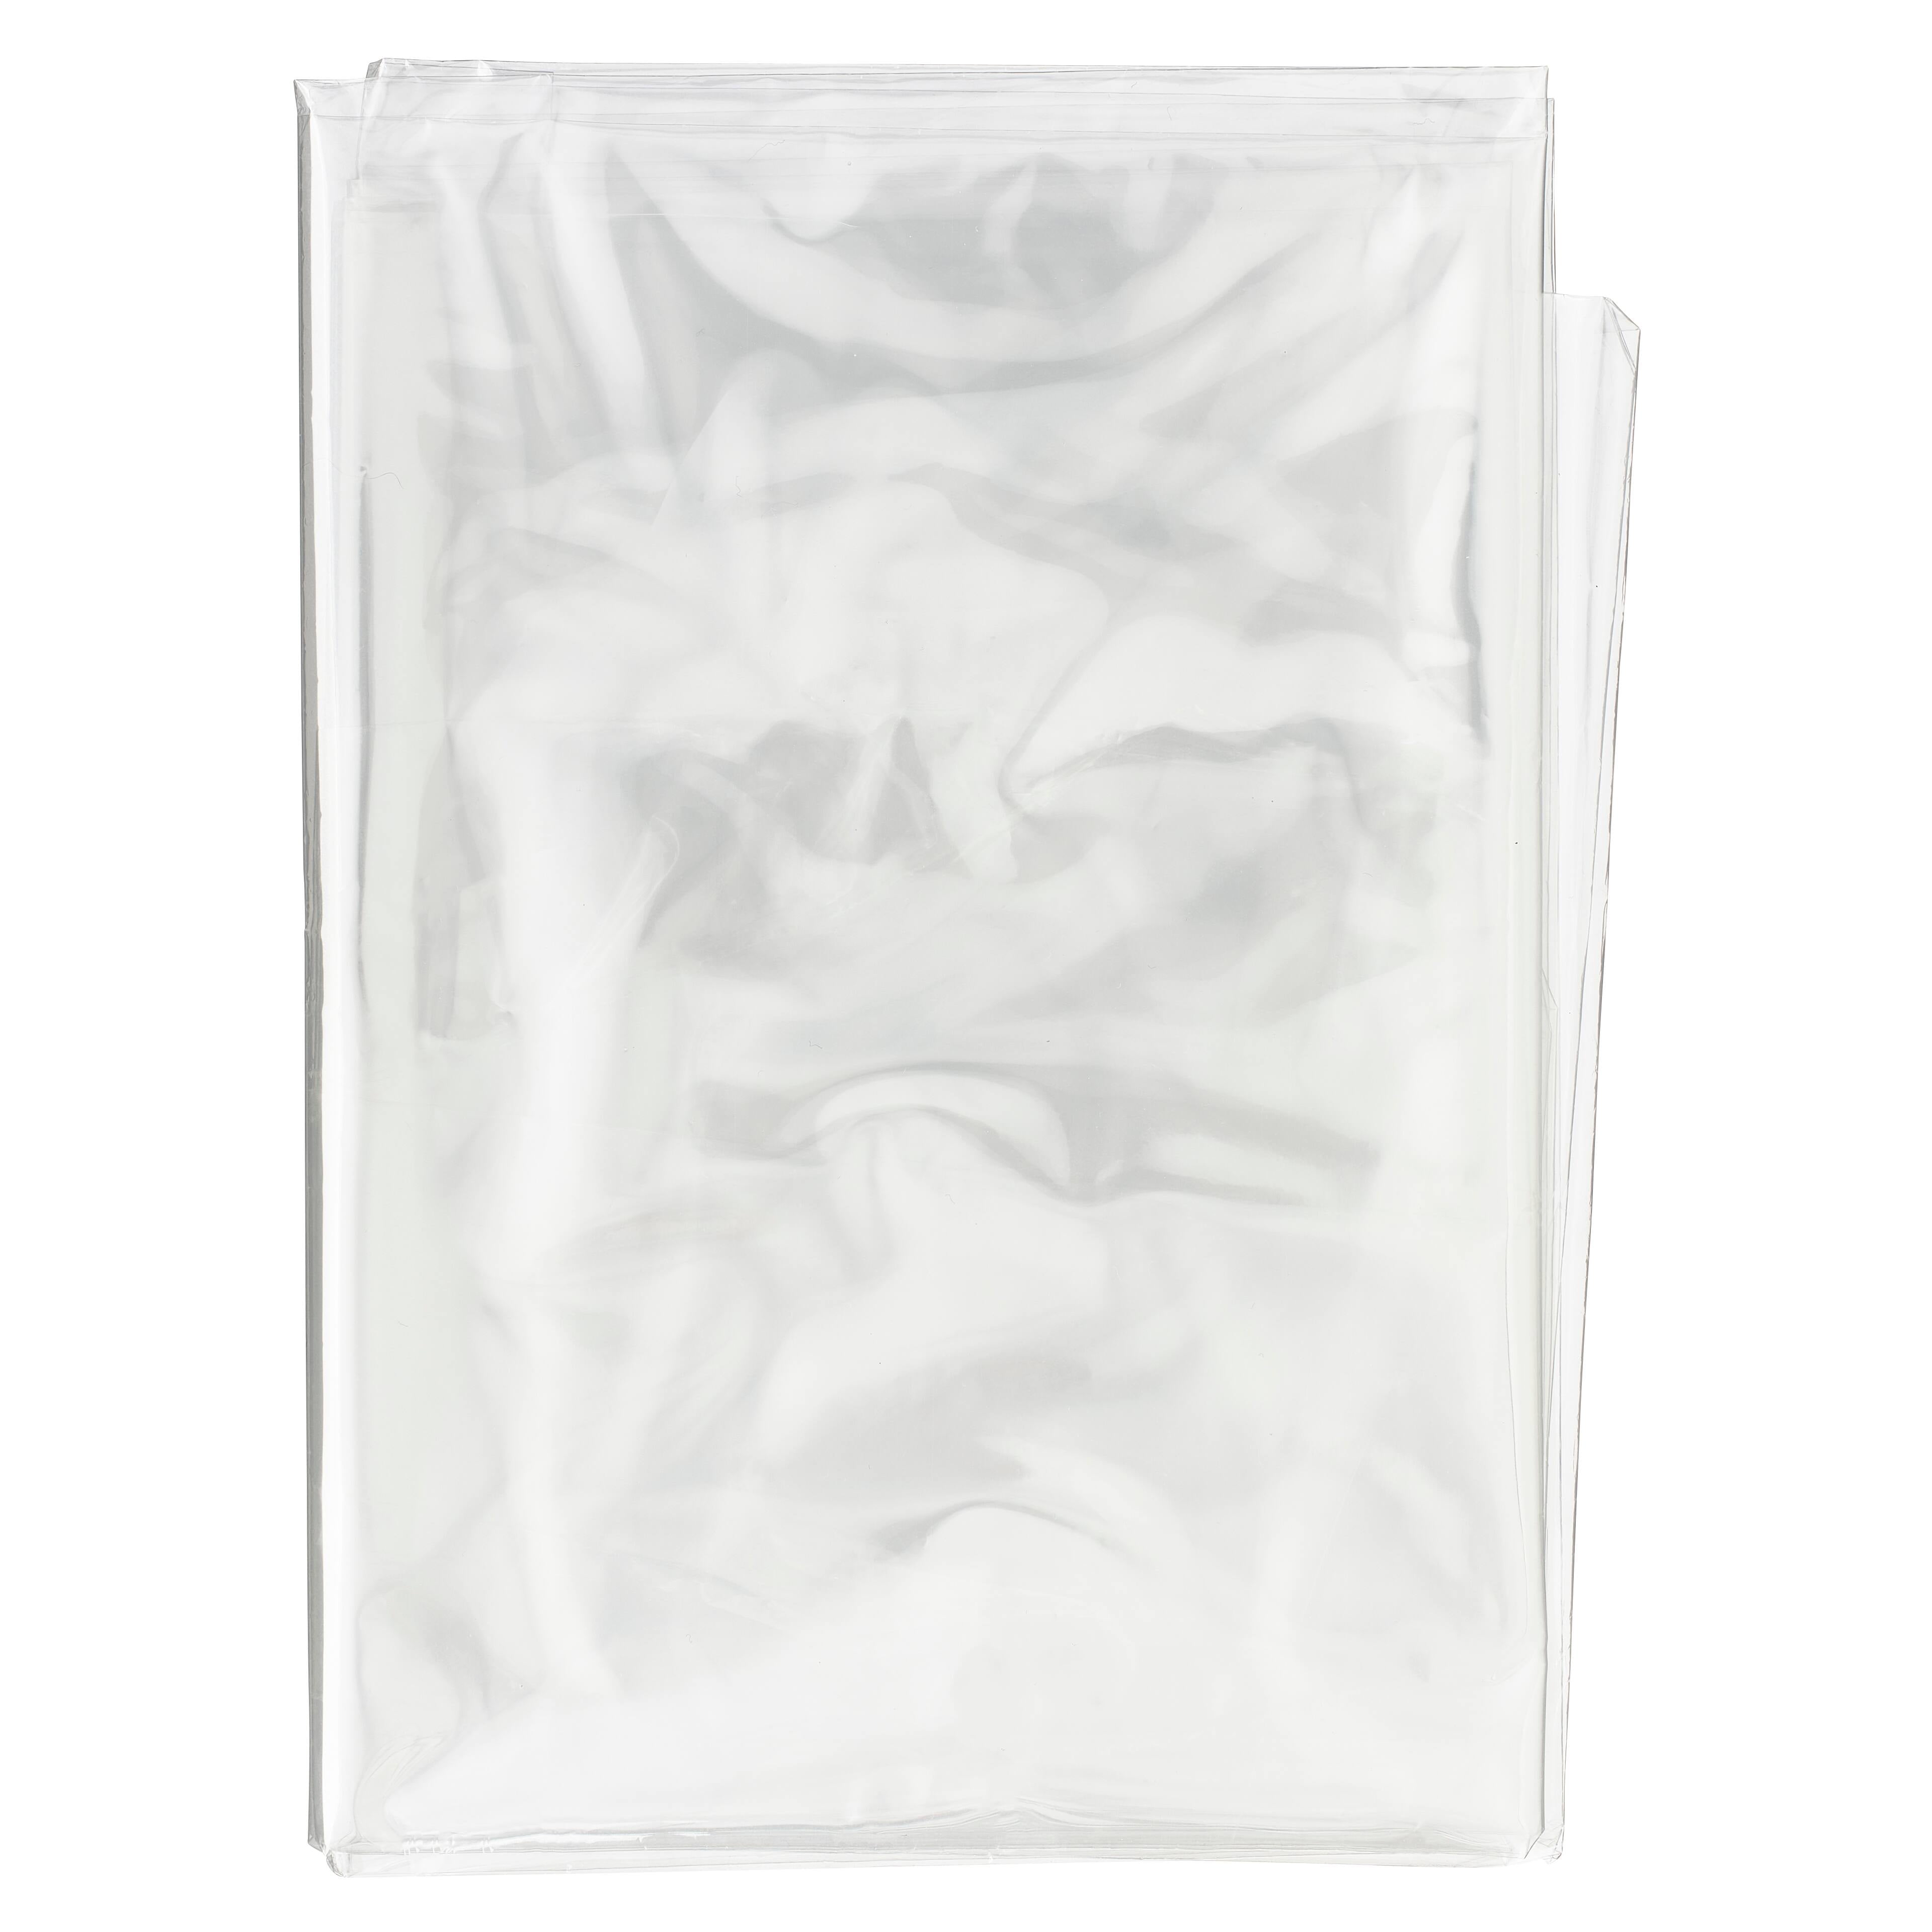 50 Pieces Shrink Wrap Bag Shoe Wrap Clear Heat Seal Shrink Plastic Wrap Bags for Shoes Books Gifts Packaging